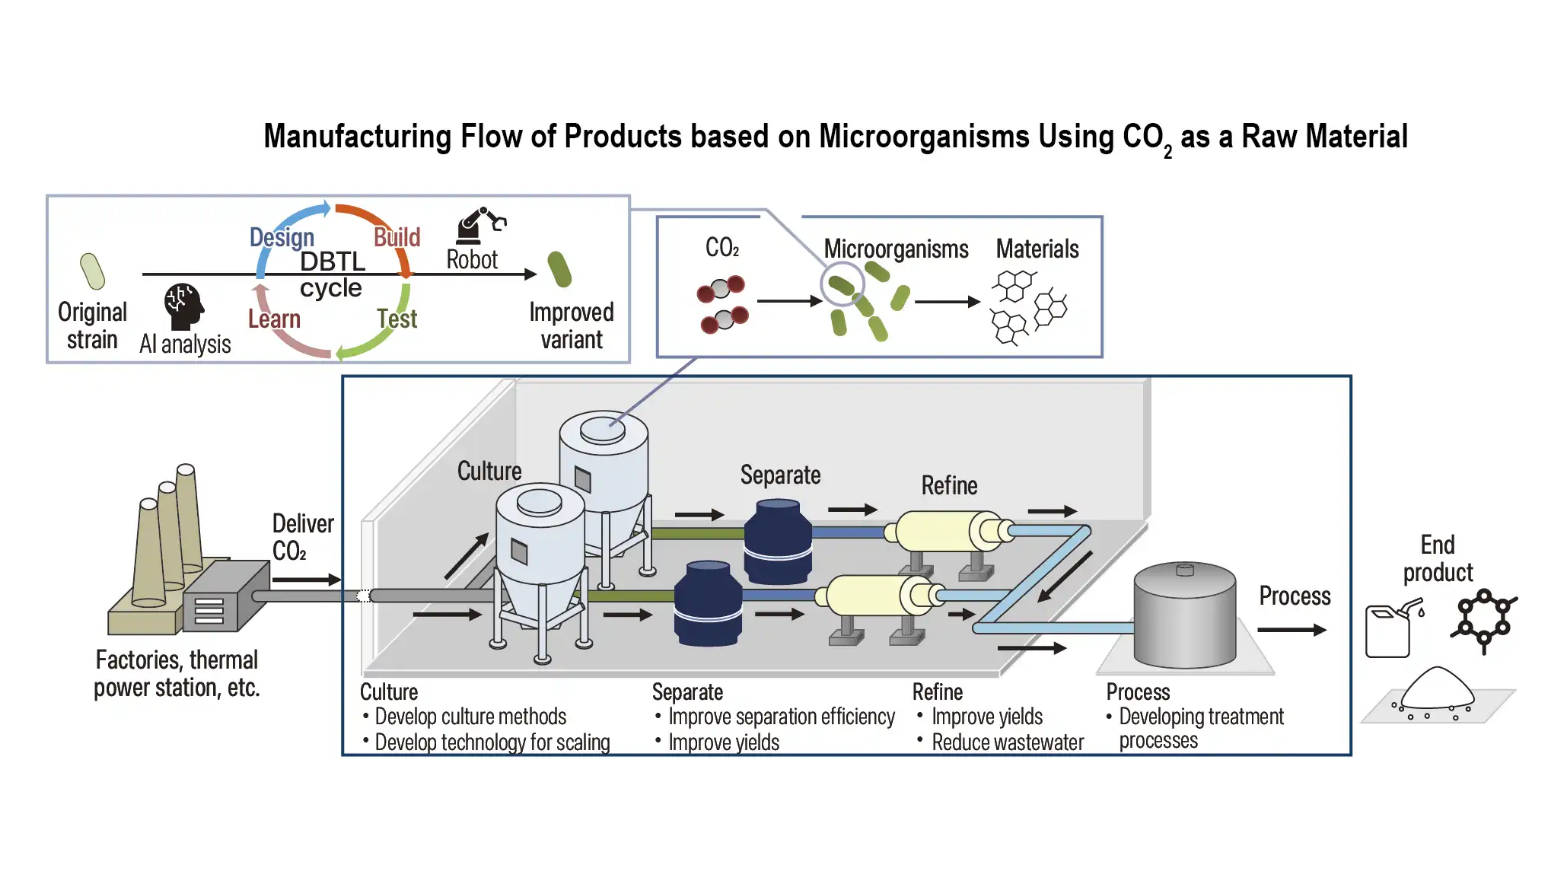 Promotion of Carbon Recycling Using CO2 from Biomanufacturing Technology as a Direct Raw Material